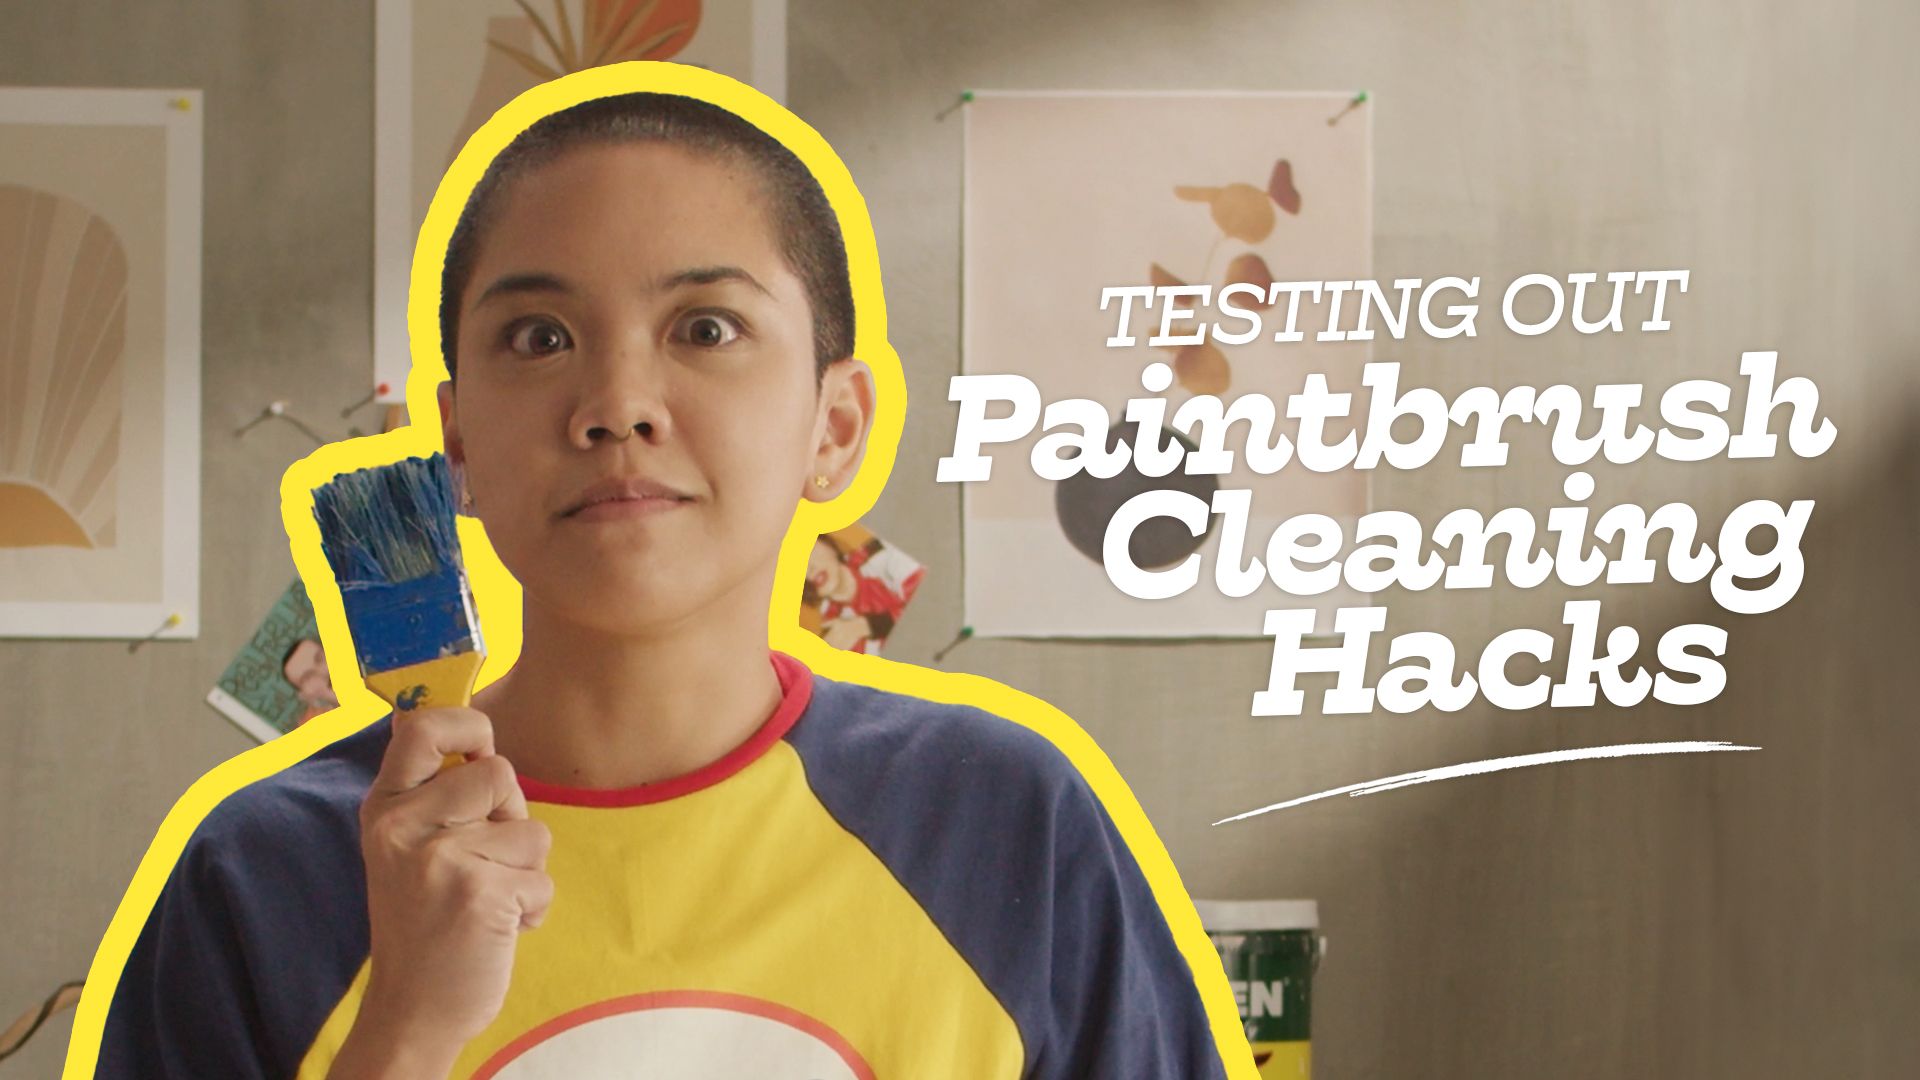 BUILD WITH B
PAINTBRUSH CLEANING HACKS